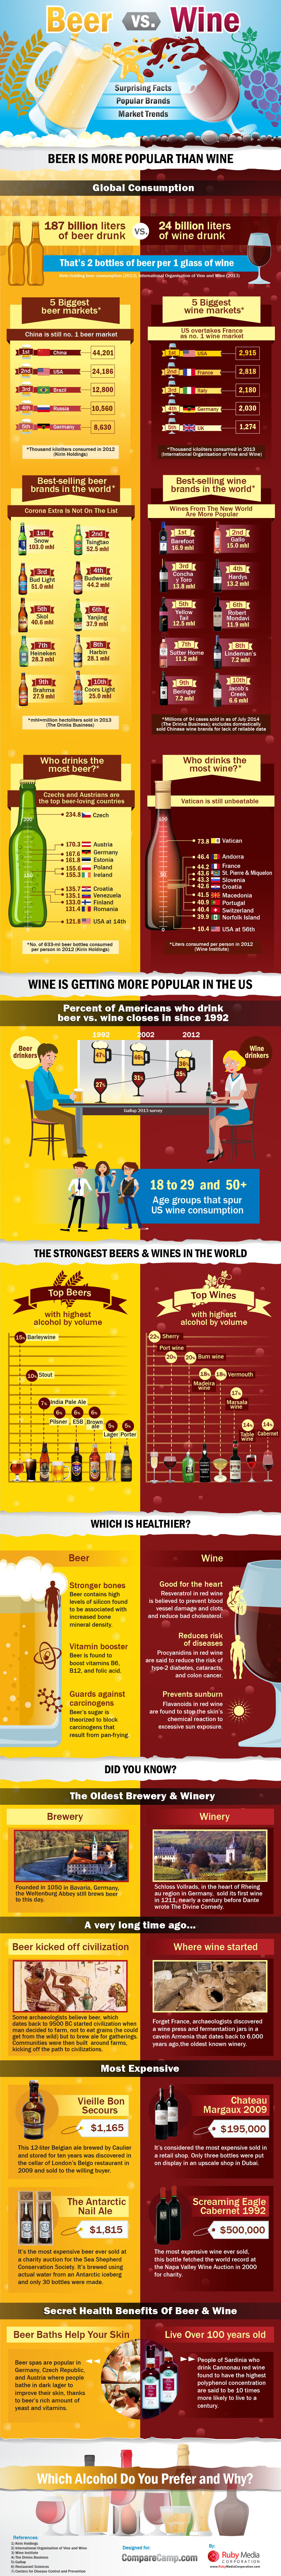 Beer Or Wine: Compare Surprising Health Facts, Market Trends And Best-selling Brands